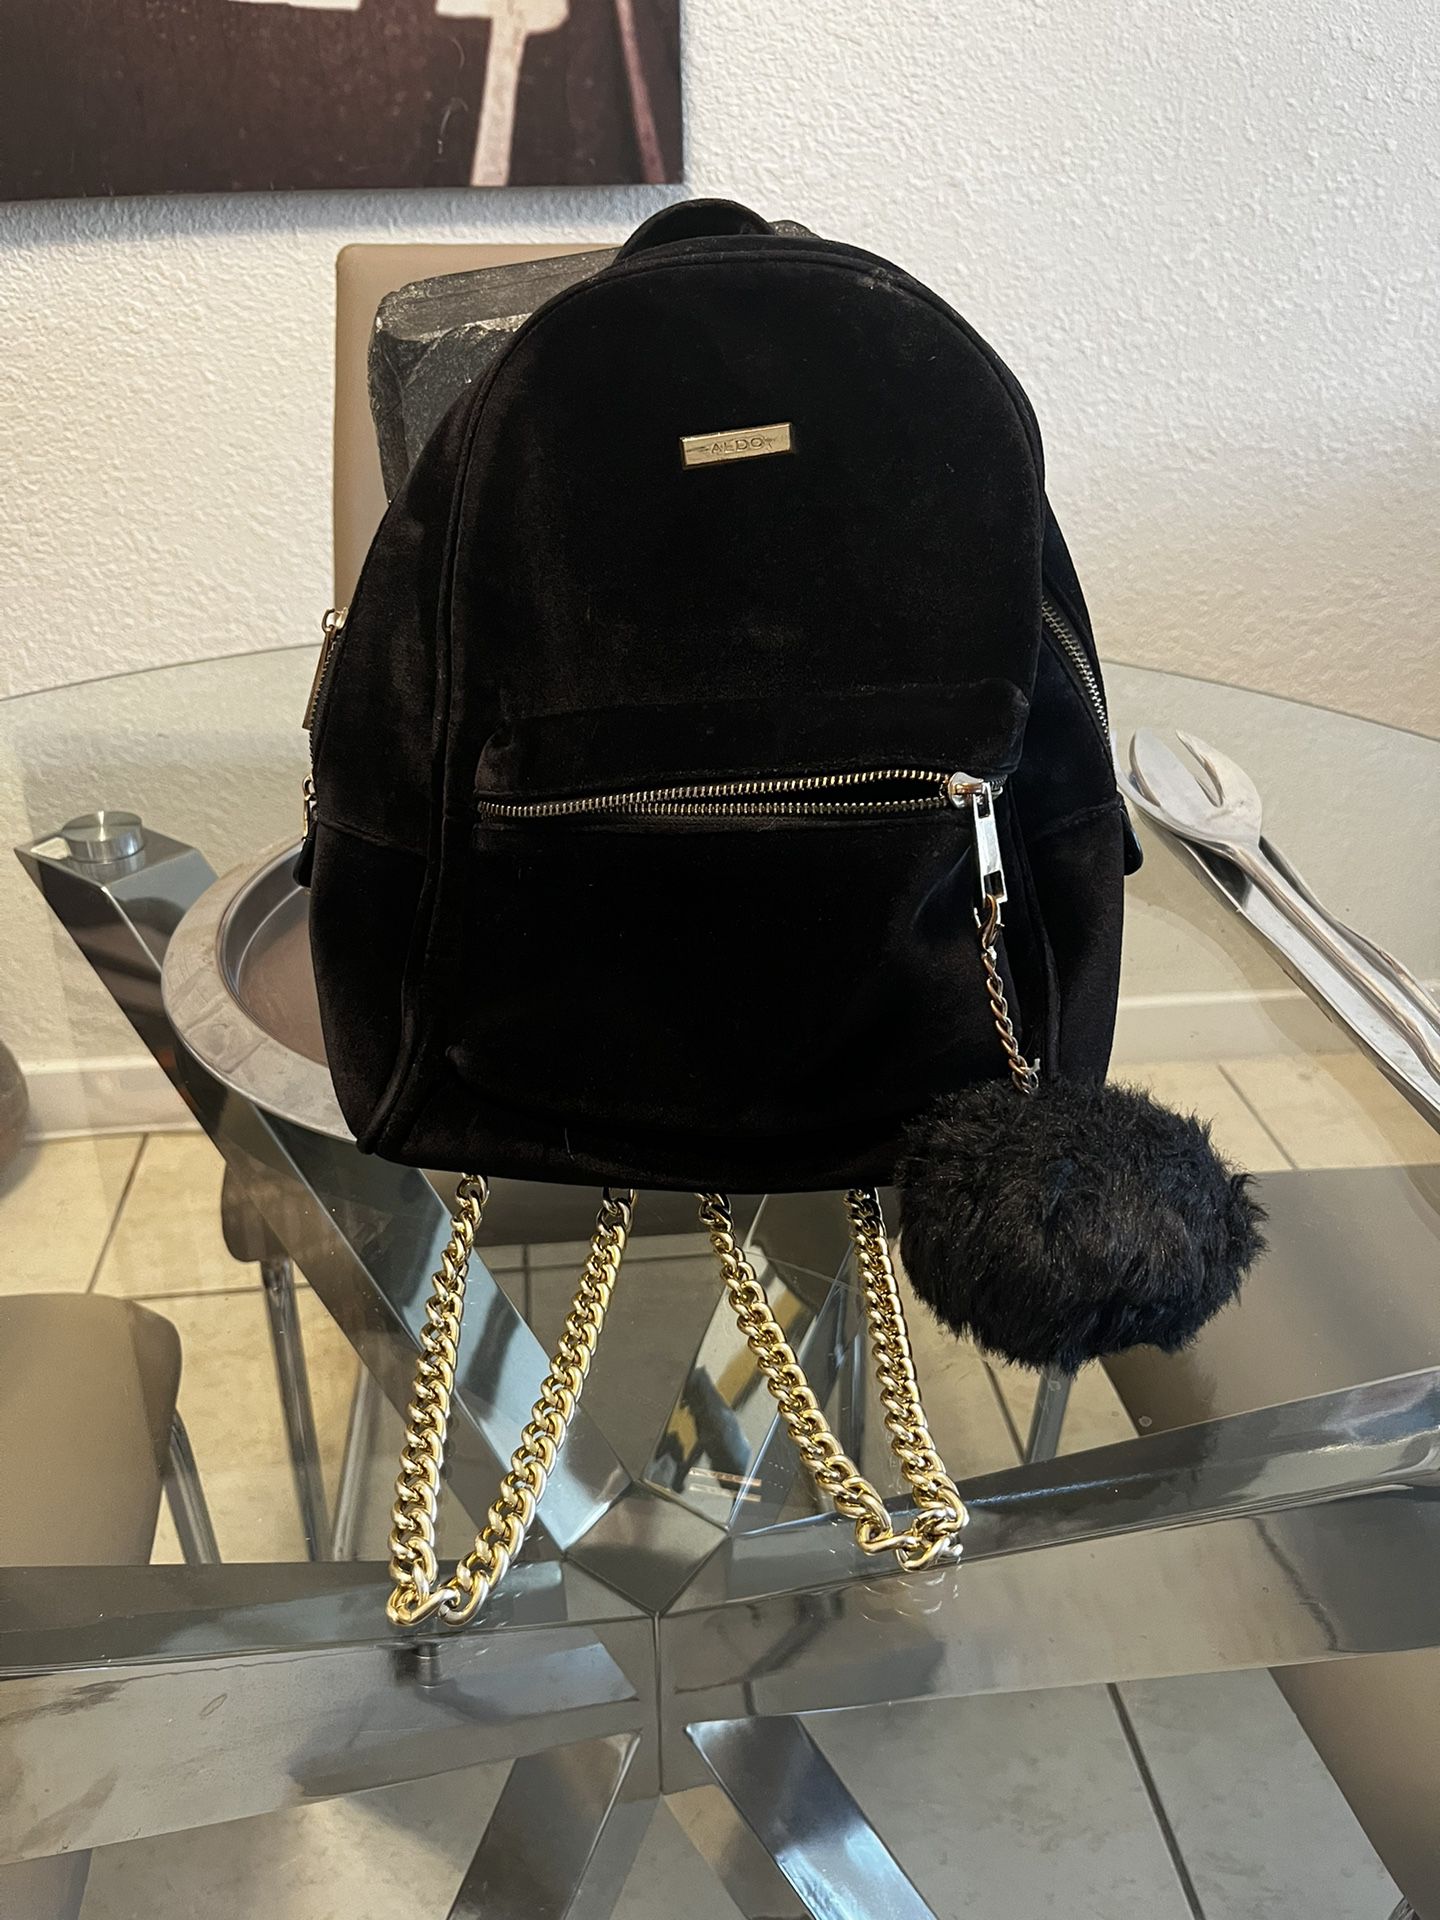 Used Aldo Sueded miniature backpack $20/ Shipping Available 